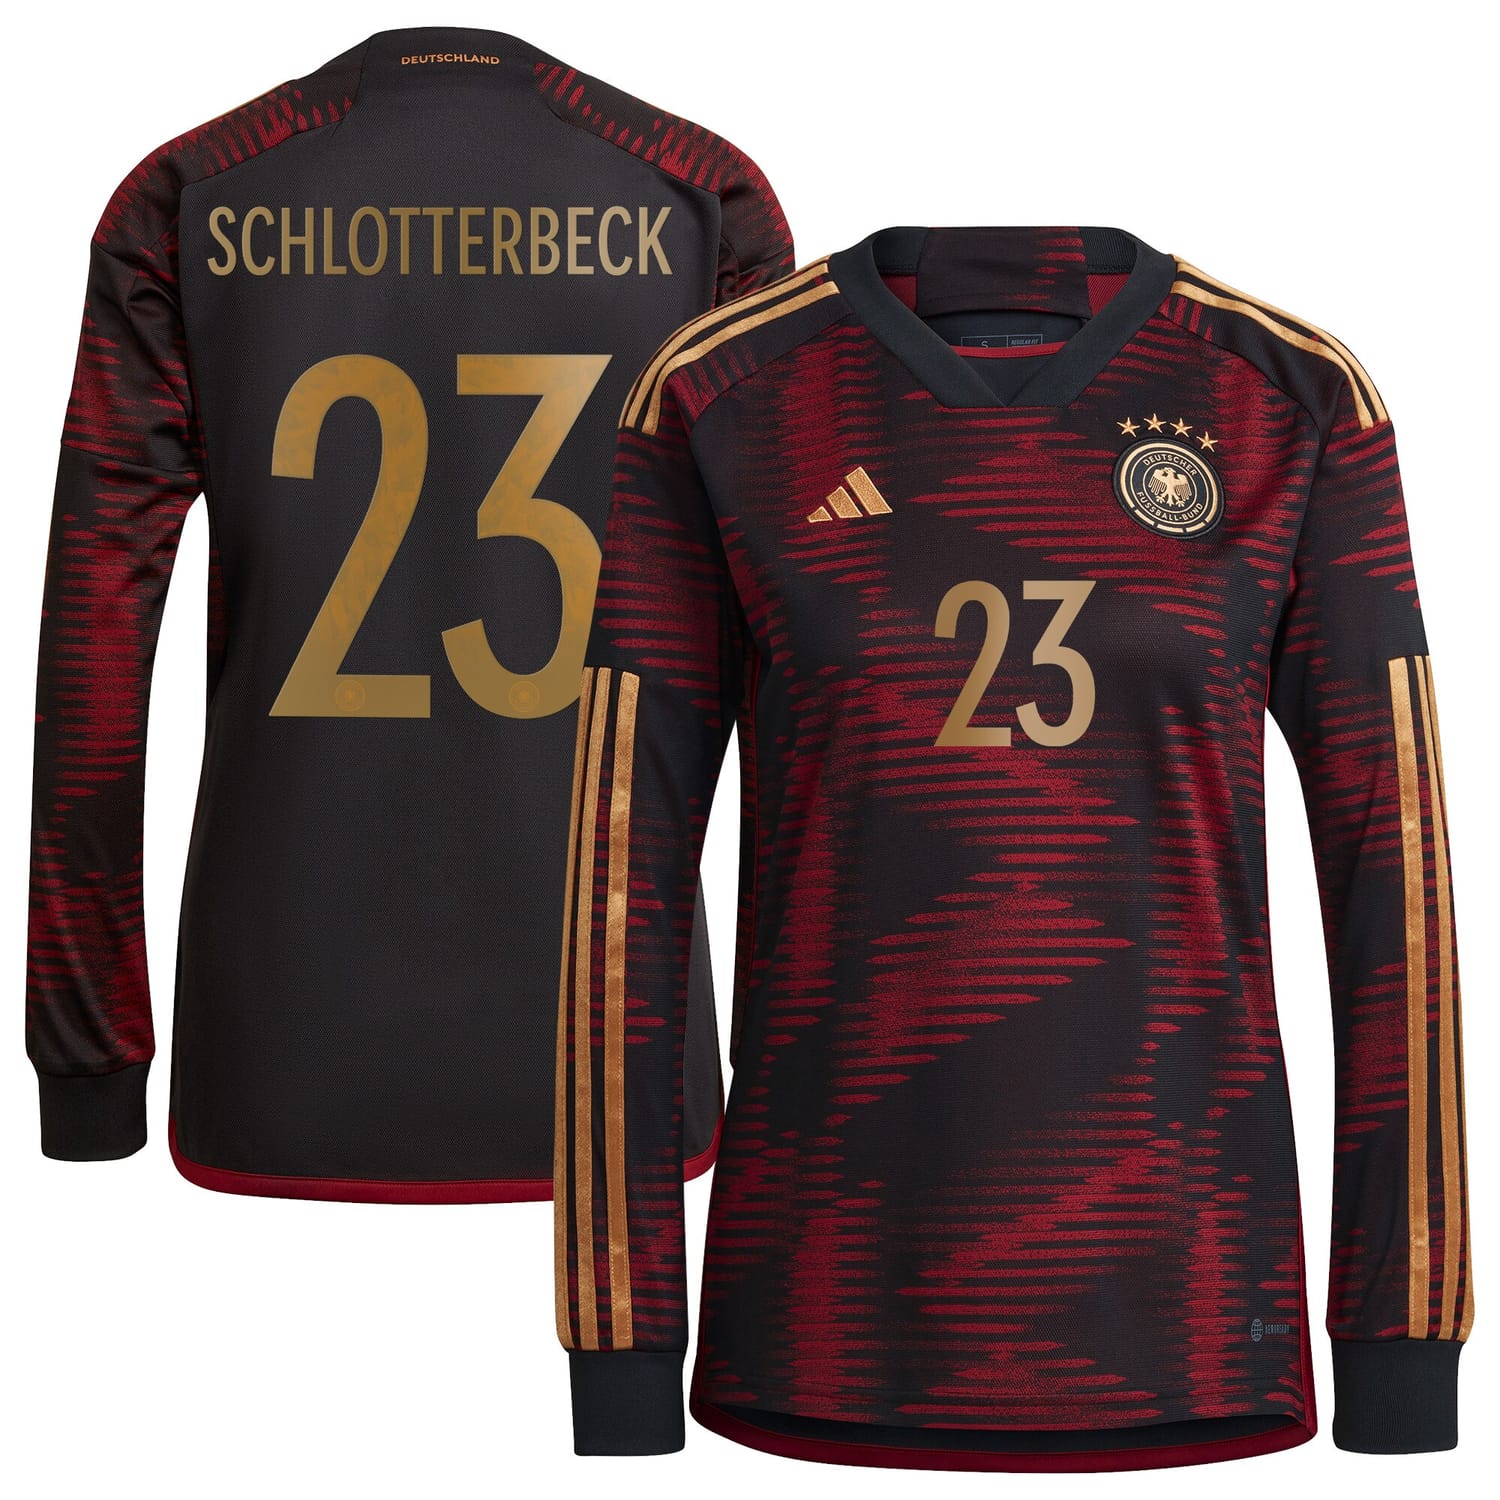 Germany National Team Away Jersey Shirt Long Sleeve player Nico Schlotterbeck 23 printing for Women